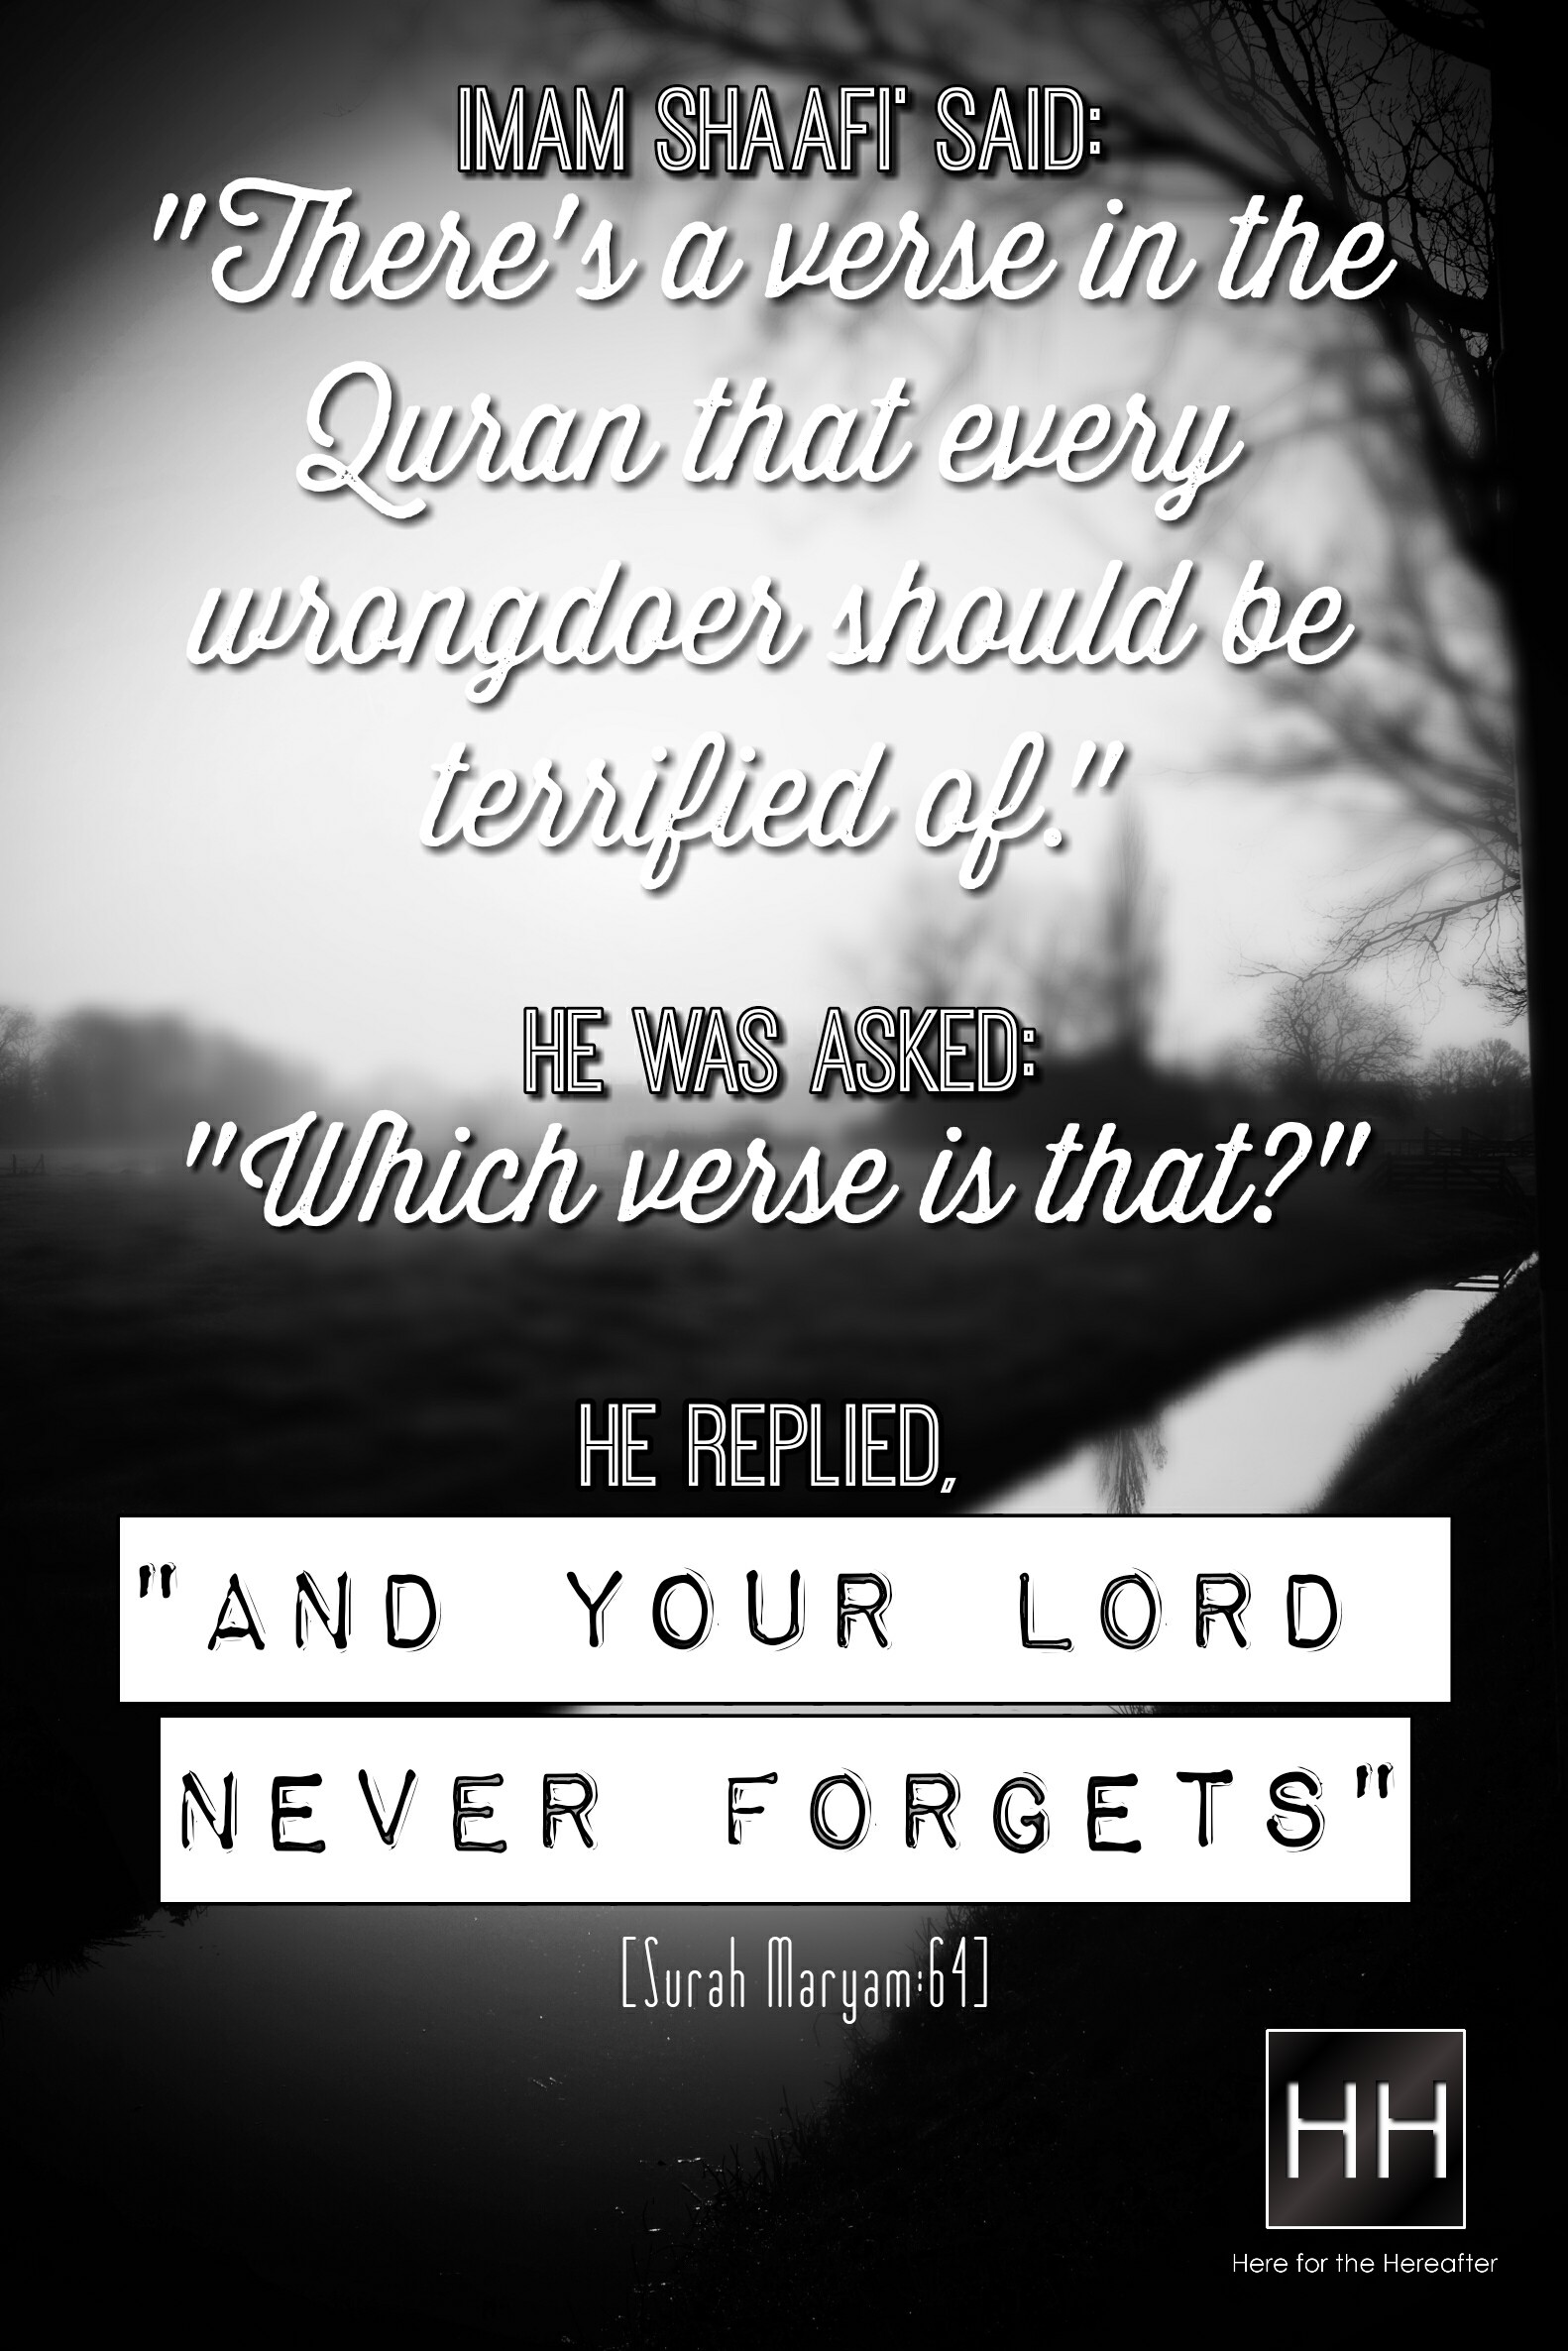 Your Lord never forgets